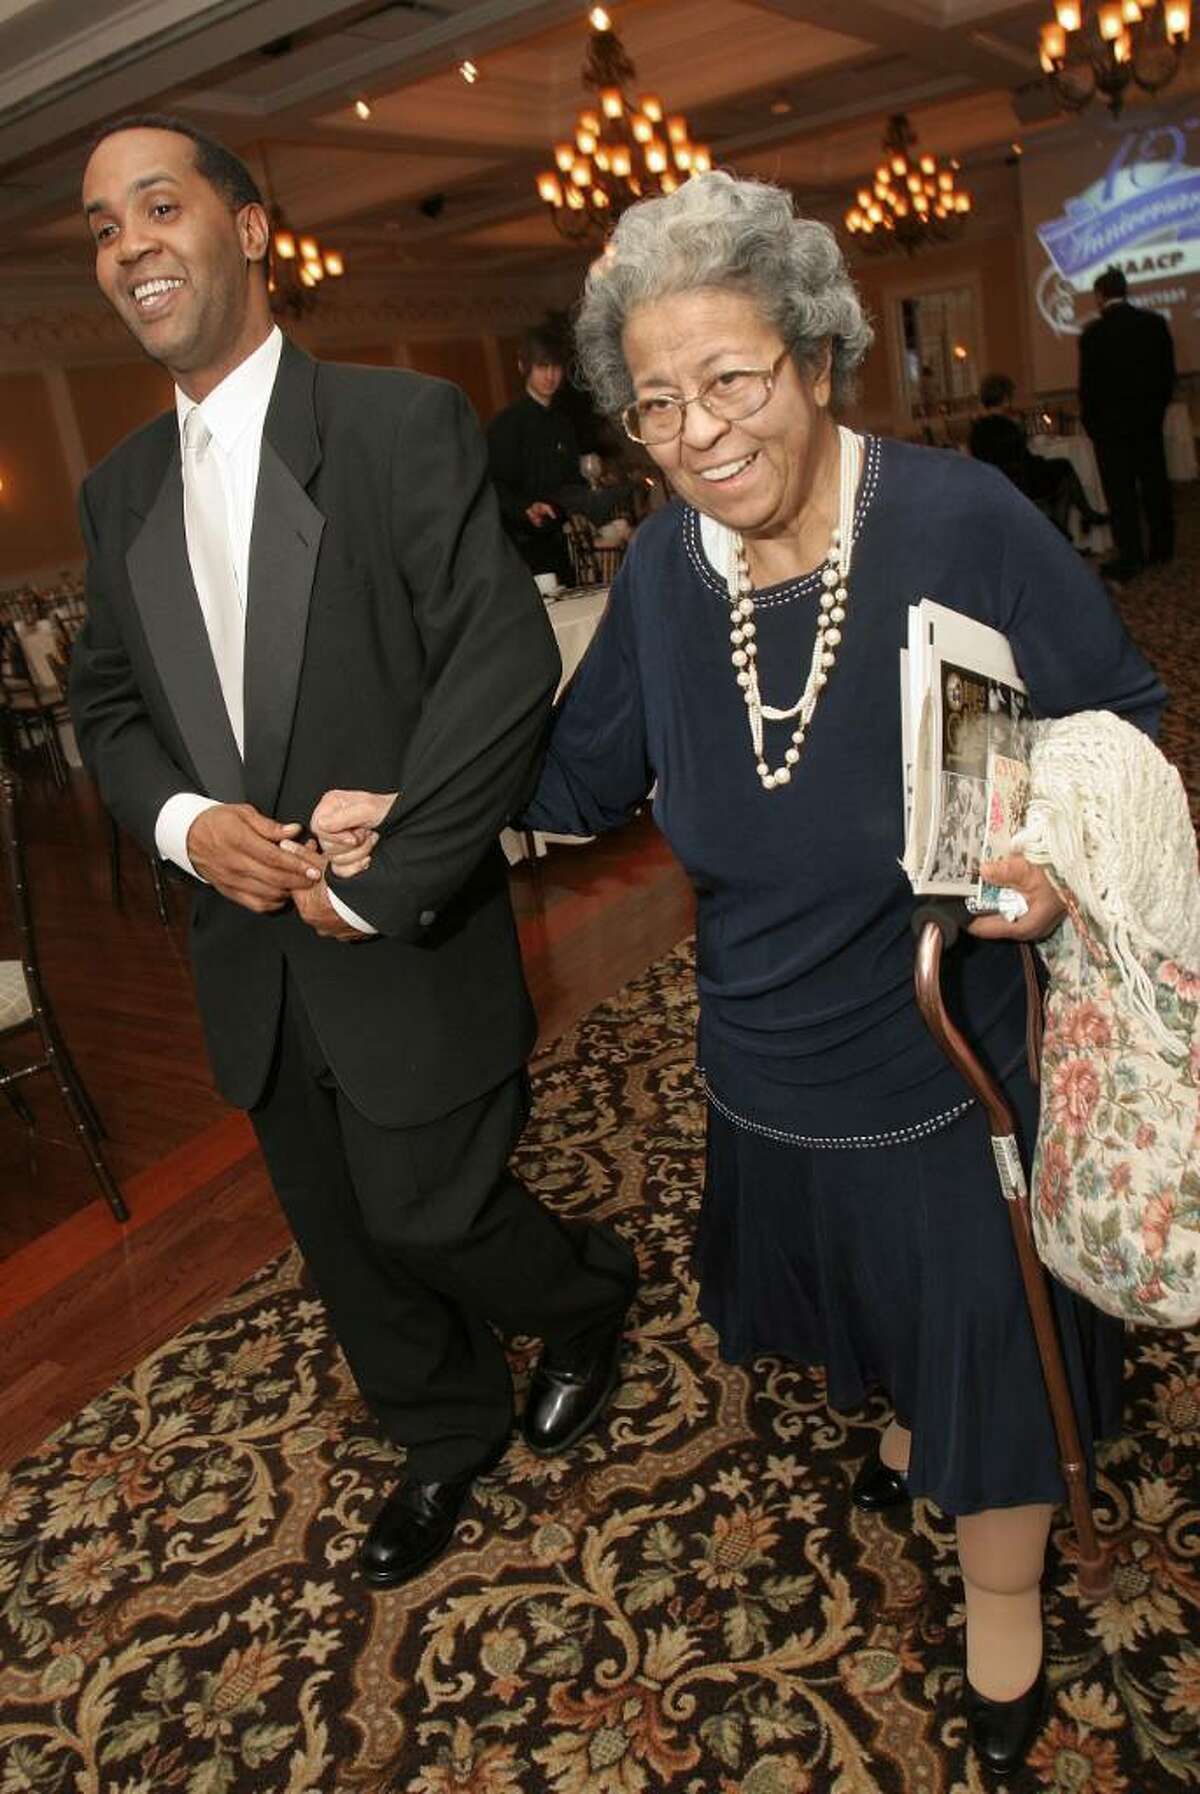 Freedom Fund Committee Chairman Tony Gaddy escorts Schenectady activist and the first female president of the Schenectady NAACP(1959-1964) Malinda Meyers at the Freedom Fund Dinner, which celebrated the 75th anniversary of the NAACP Schenectady Branch. (Joe Putrock / Special to the Times Union)